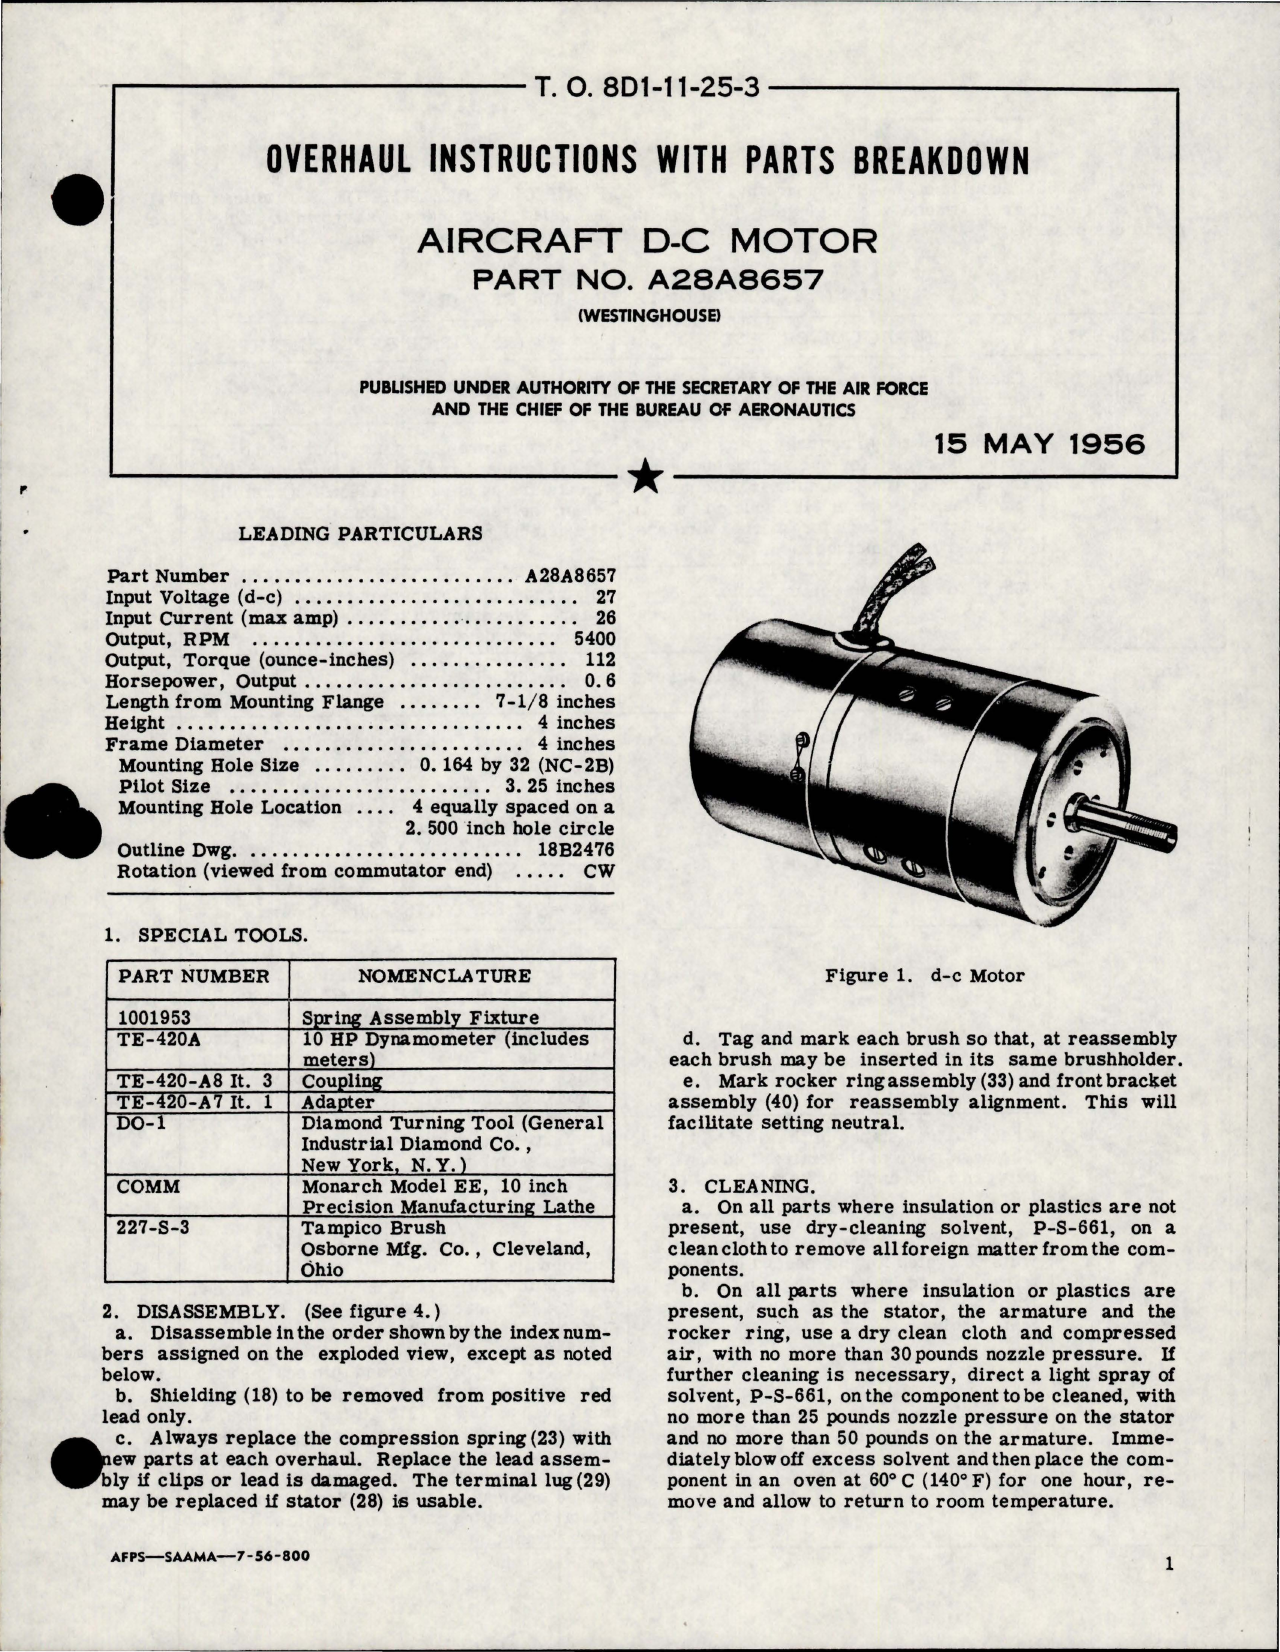 Sample page 1 from AirCorps Library document: Overhaul Instructions with Parts for Aircraft DC Motor - Part A28A8657 